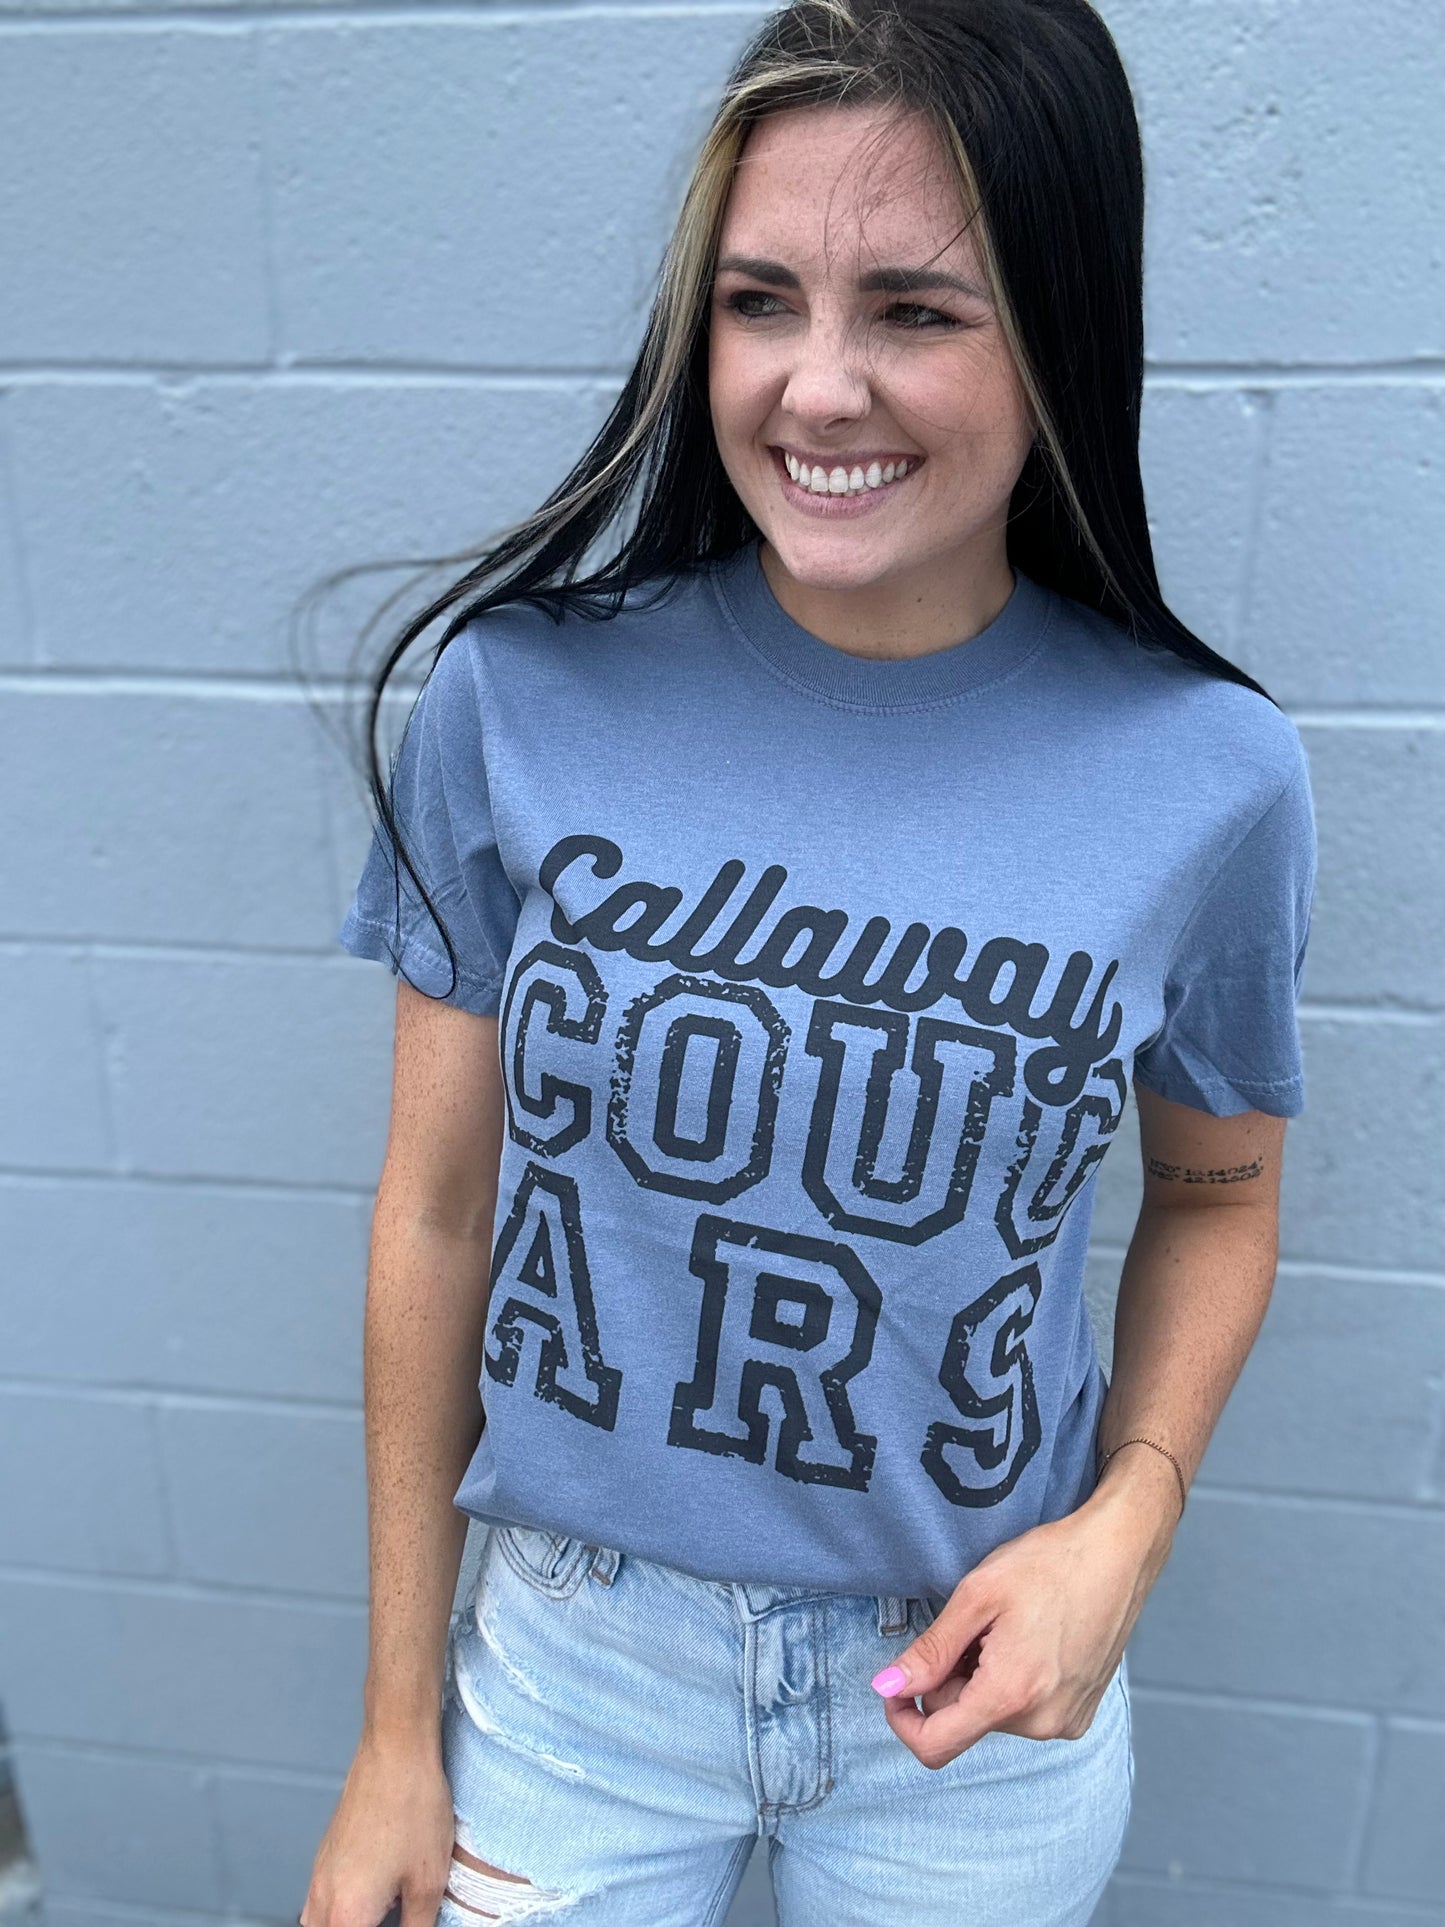 Callaway Cougars on Blue Jean